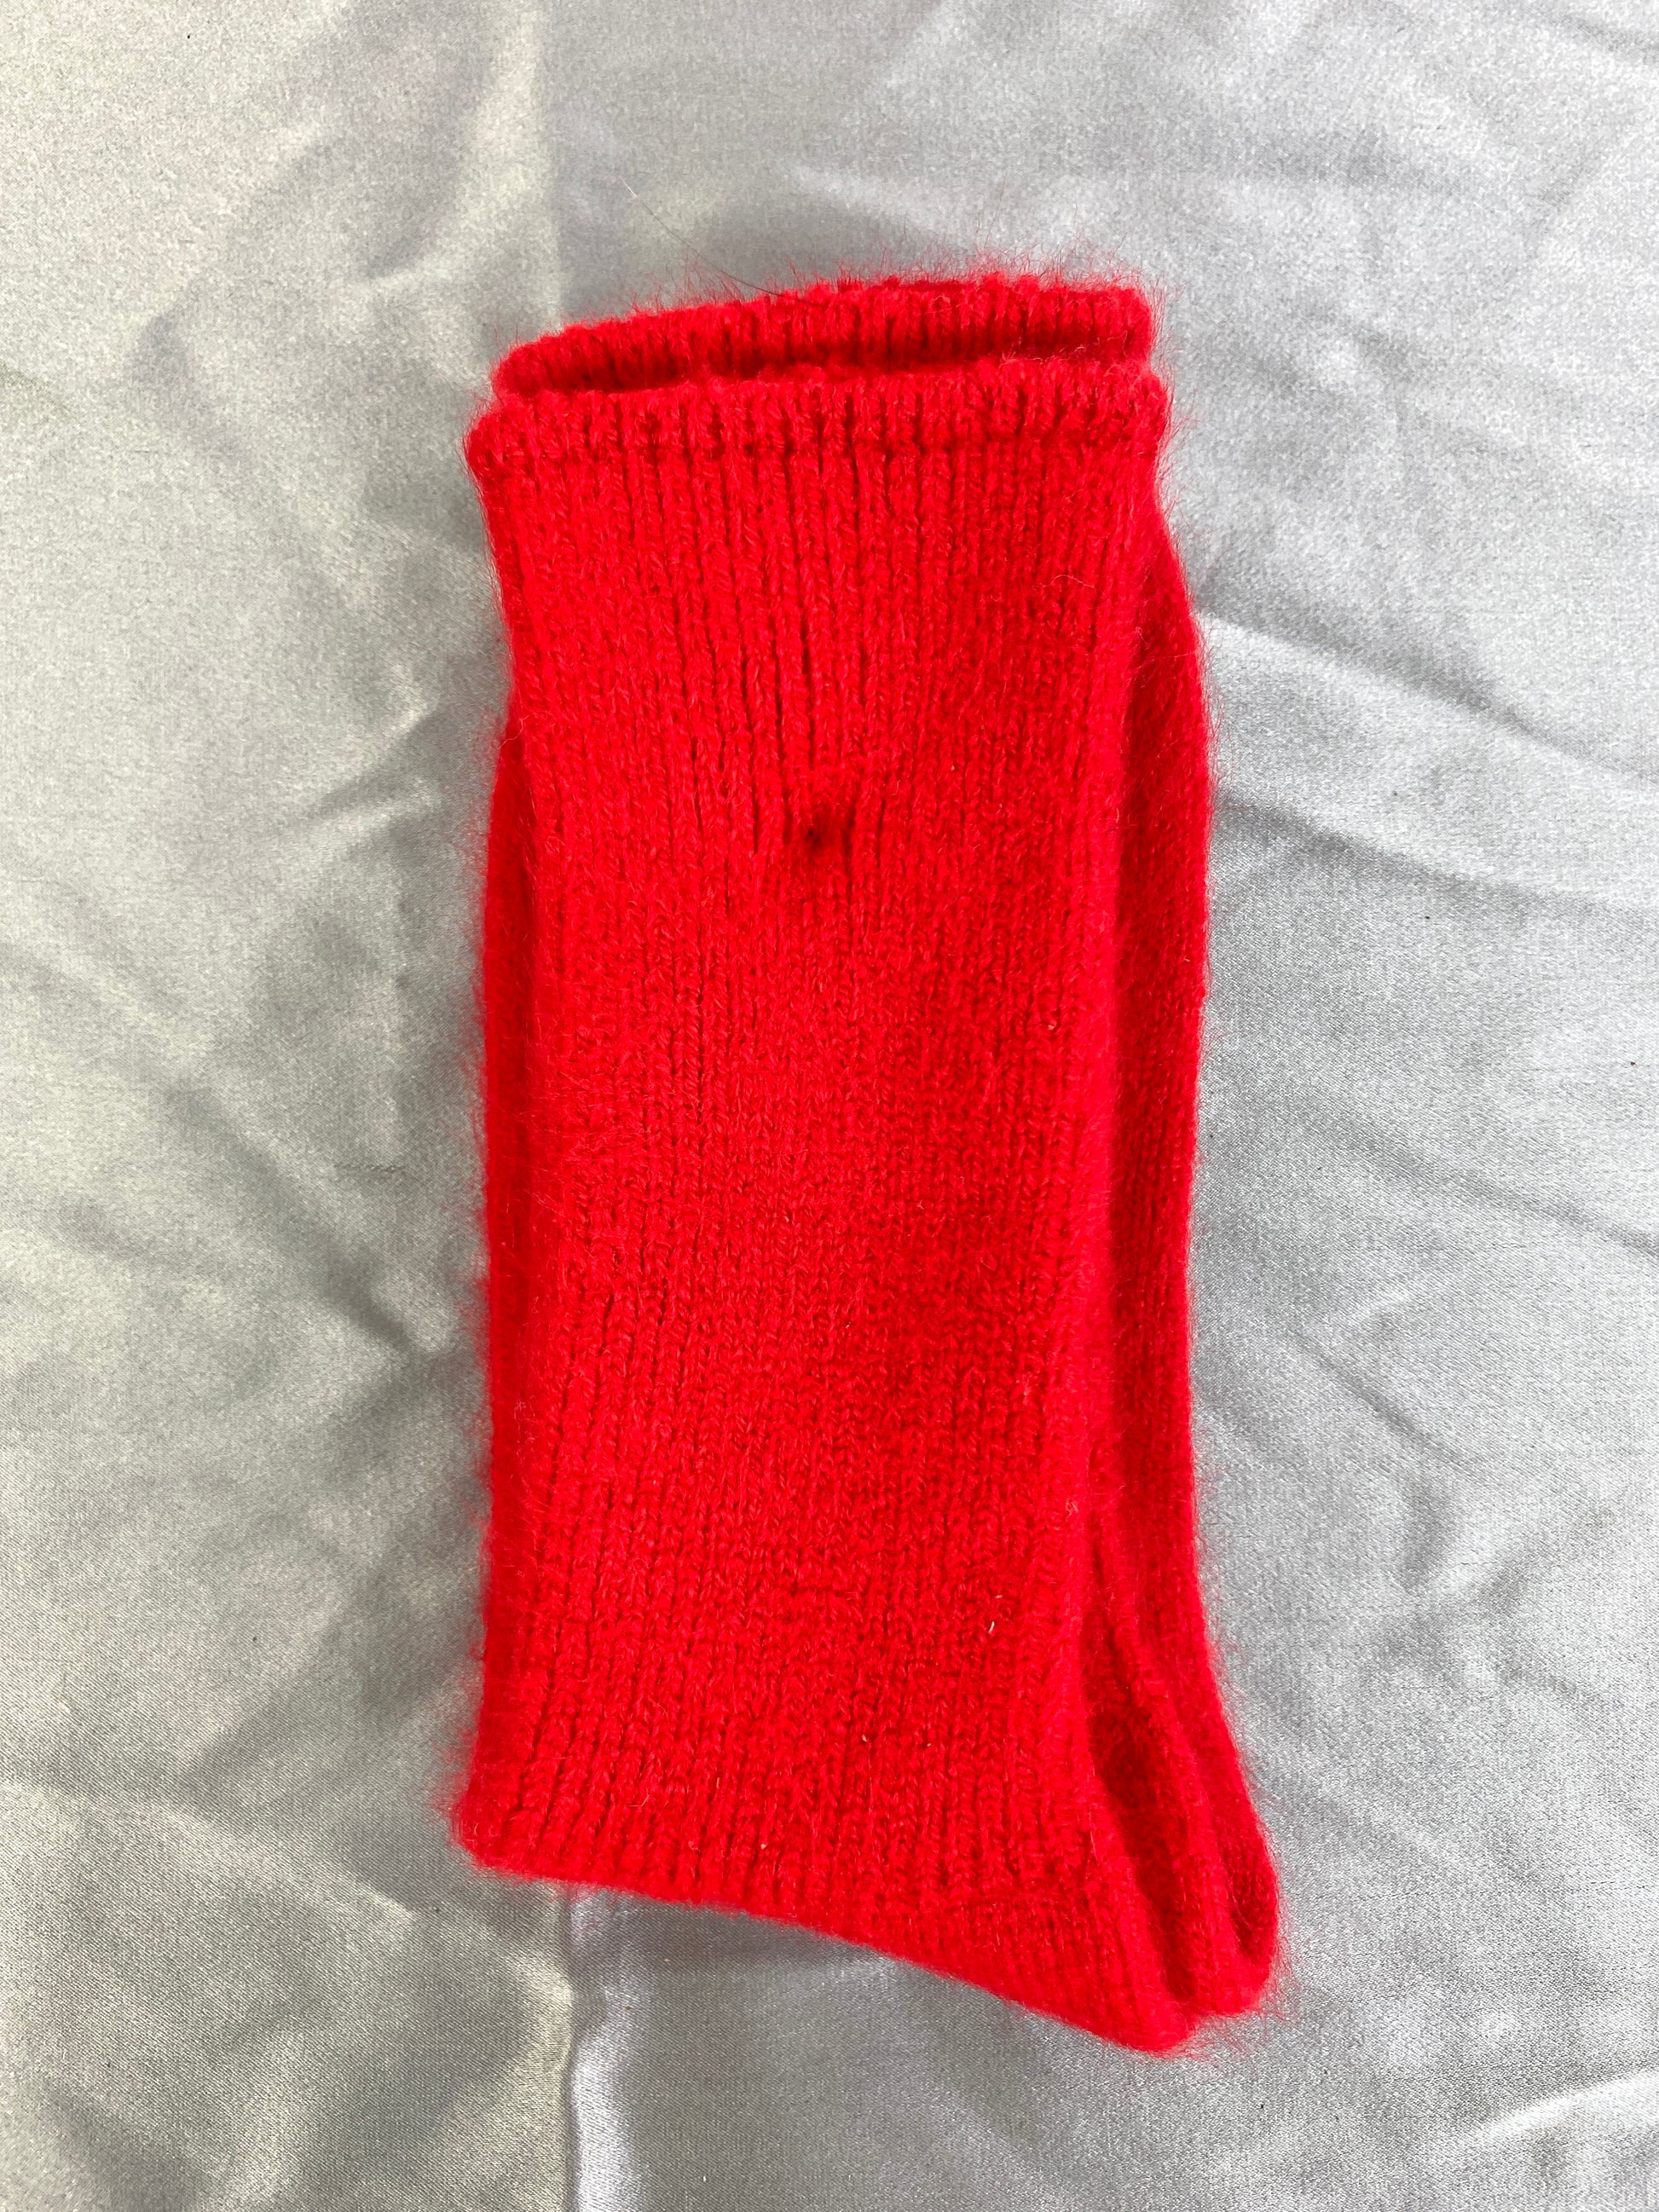 Vintage 1960s Deadstock Bonnie Doon Soft Bright Red Acrylic Cashmere Ribbed Socks, x1 